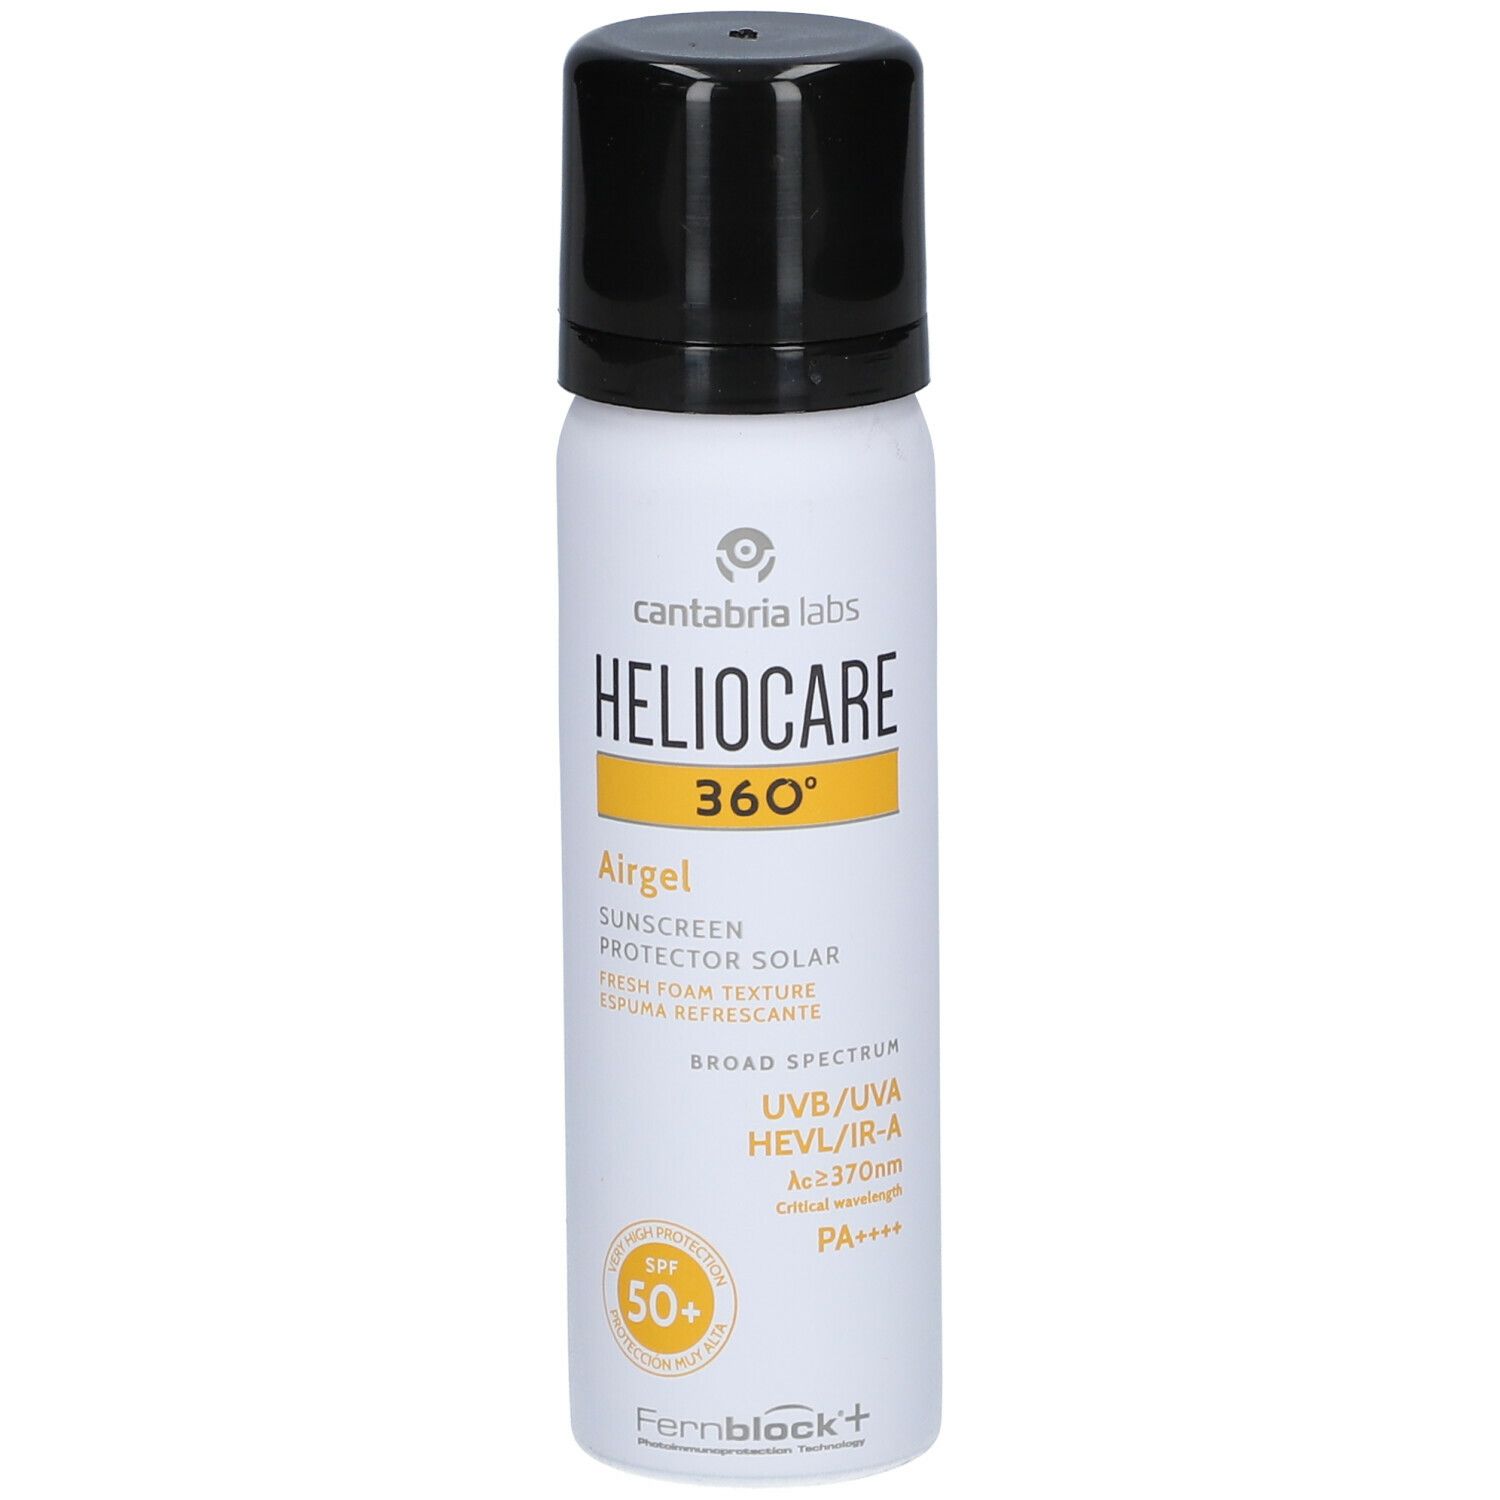 Cantabria Labs Heliocare® 360° Airgel Spf50+